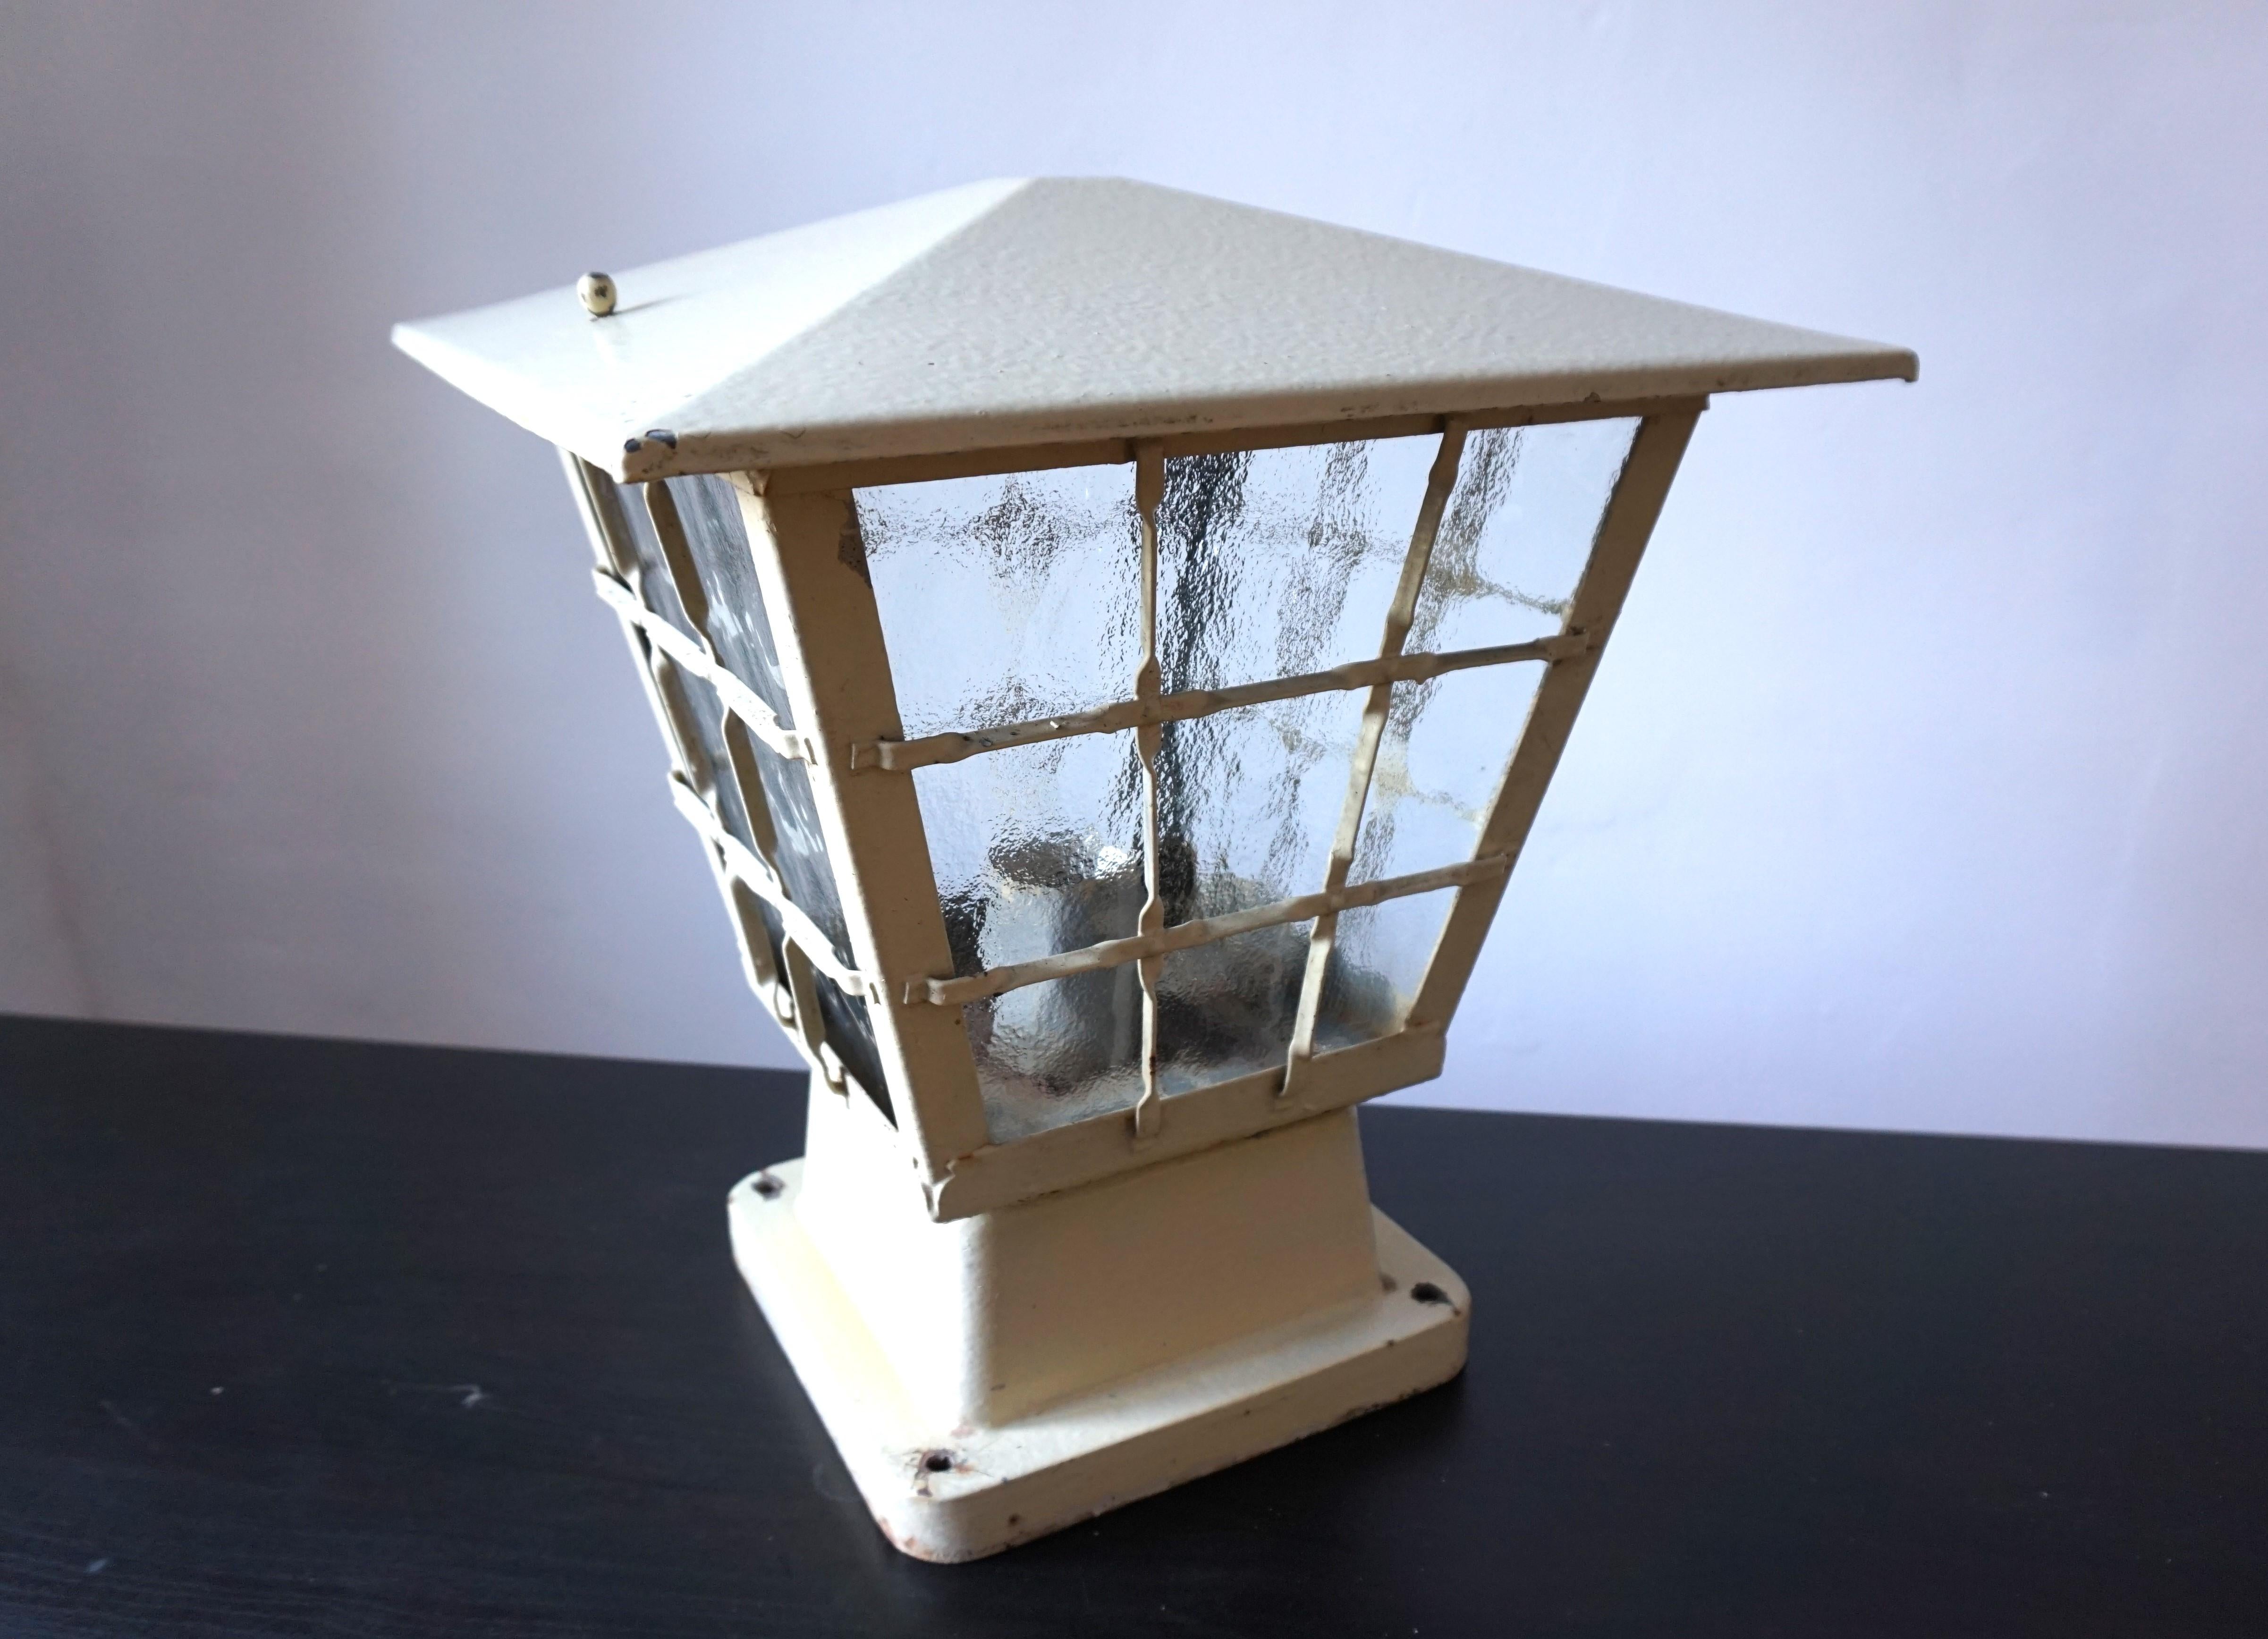 A very massive garden lamp in a traditional 60s design. The lamp is made of metal and coated with an ivory-colored paint, presumably the original paint. The lid is designed in the form of a tent roof and can be removed using two screws. The glass